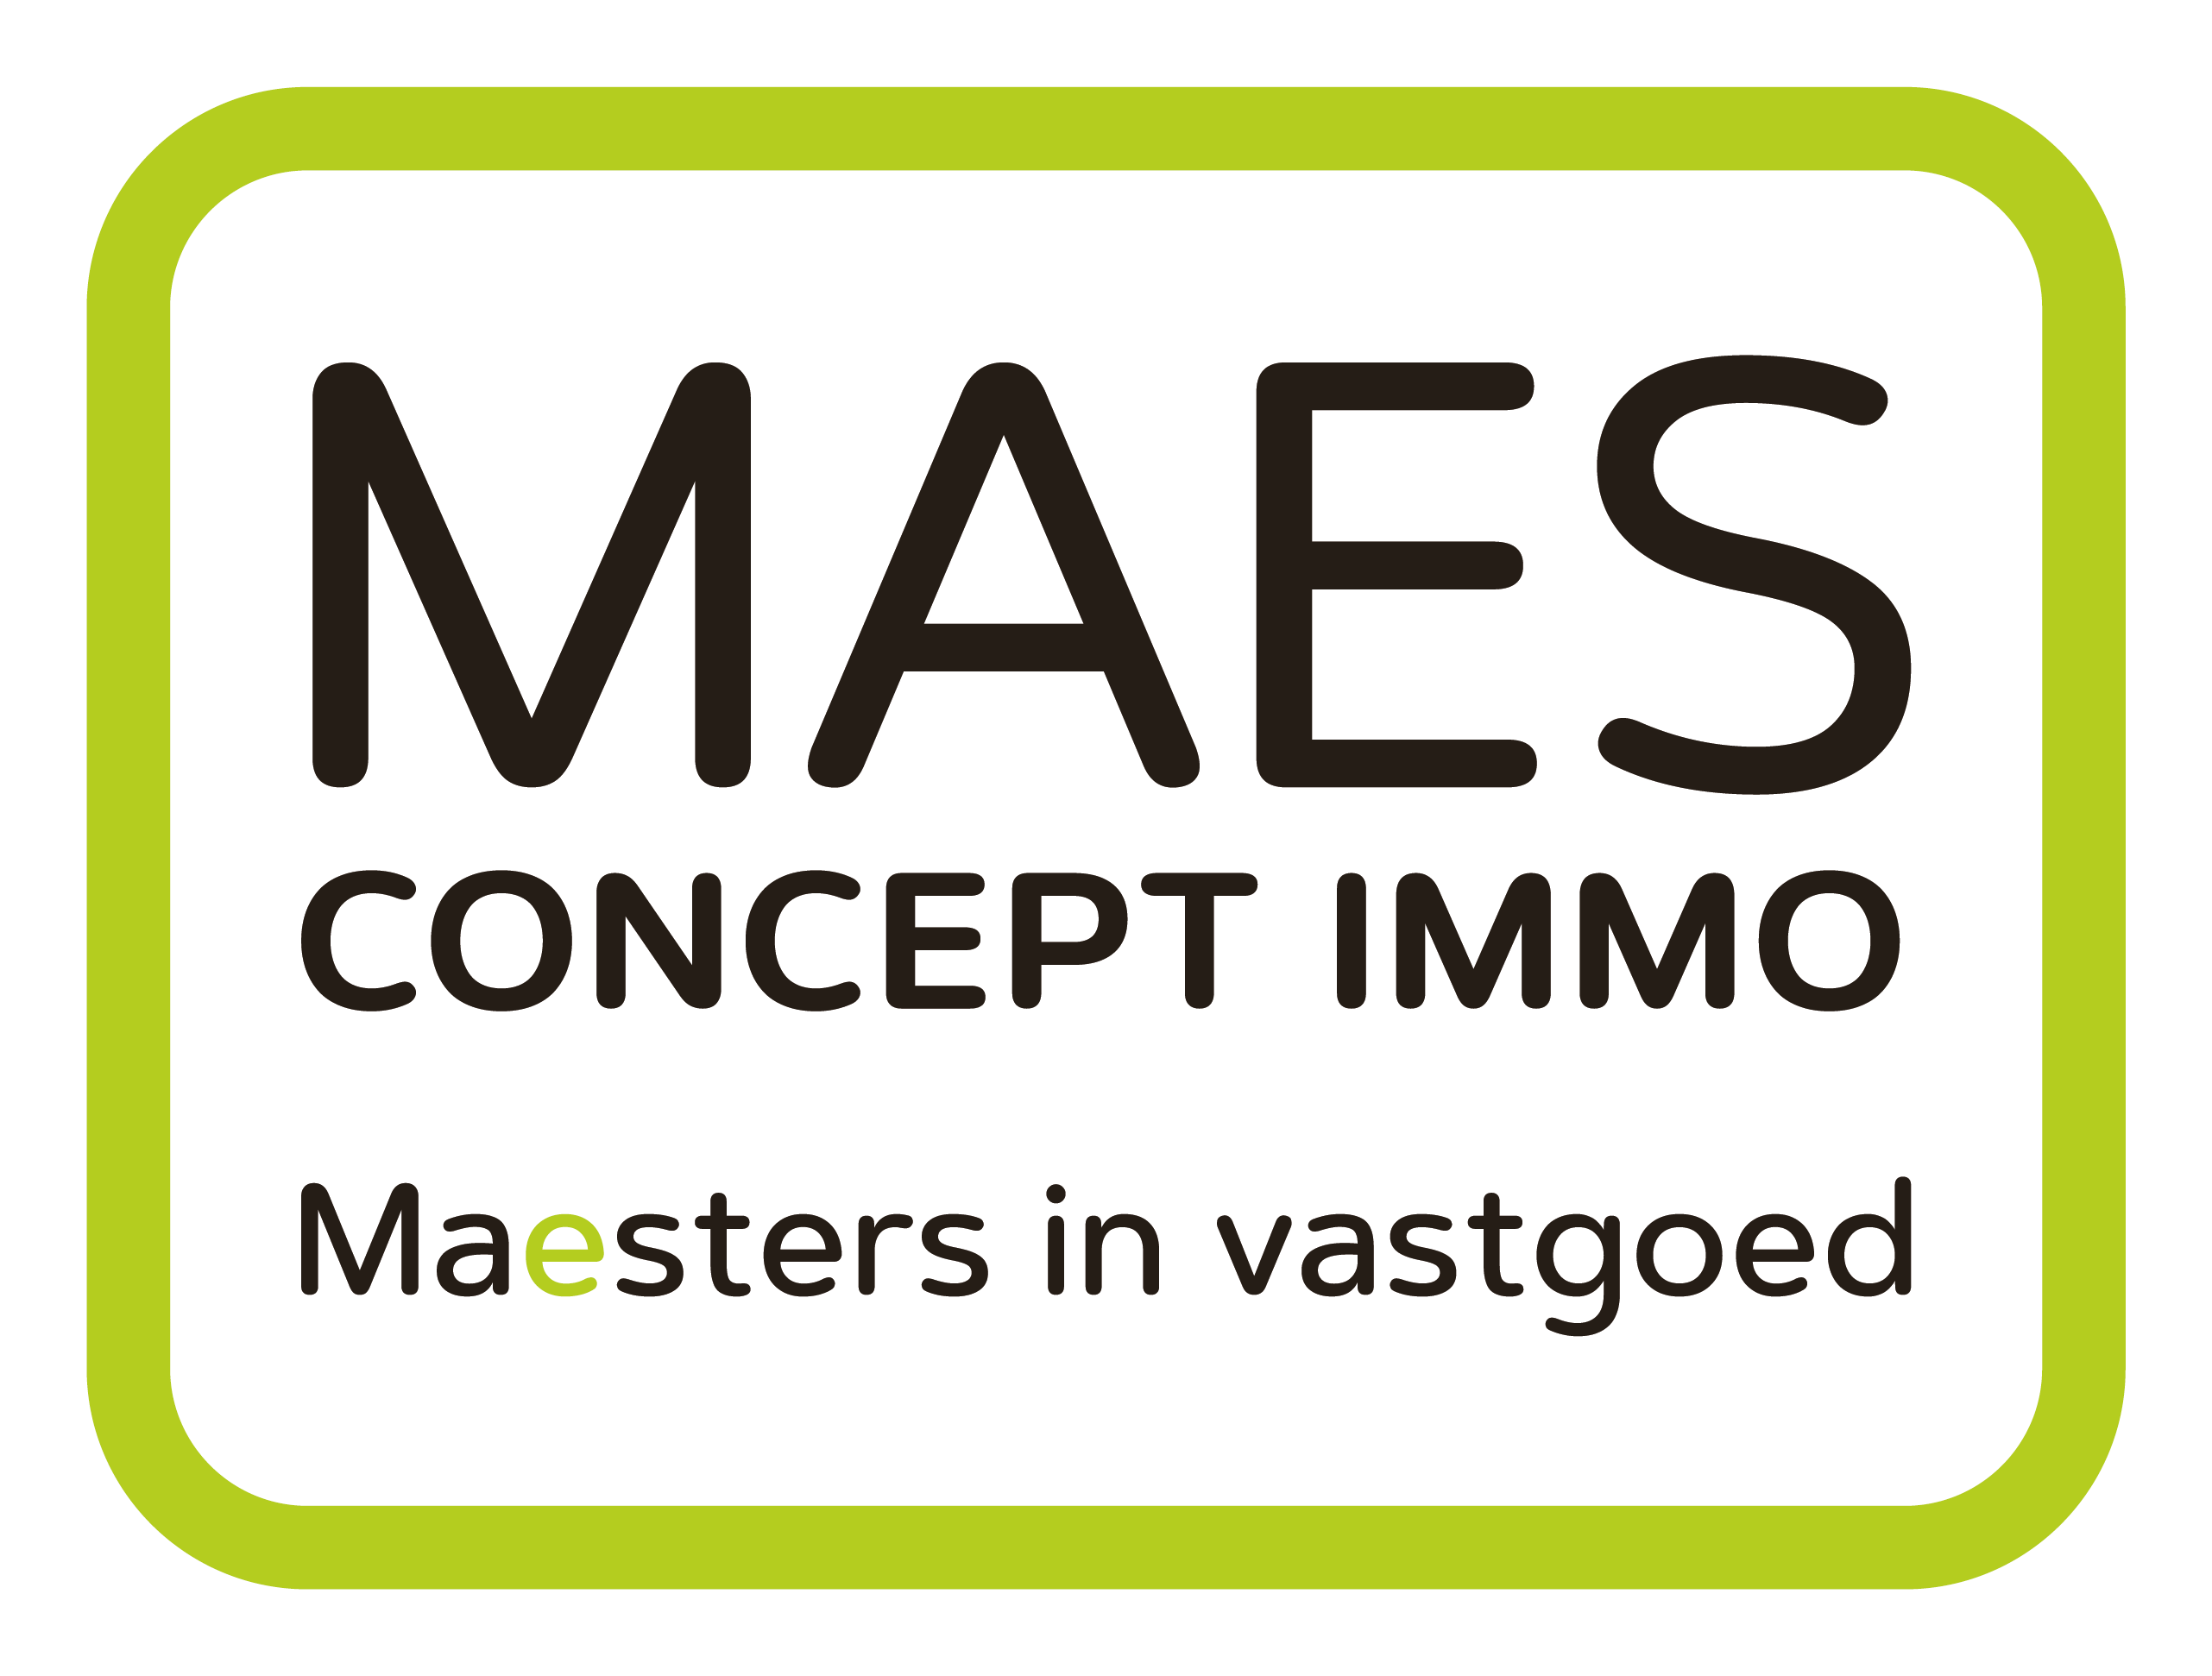 Maes Concept Immo